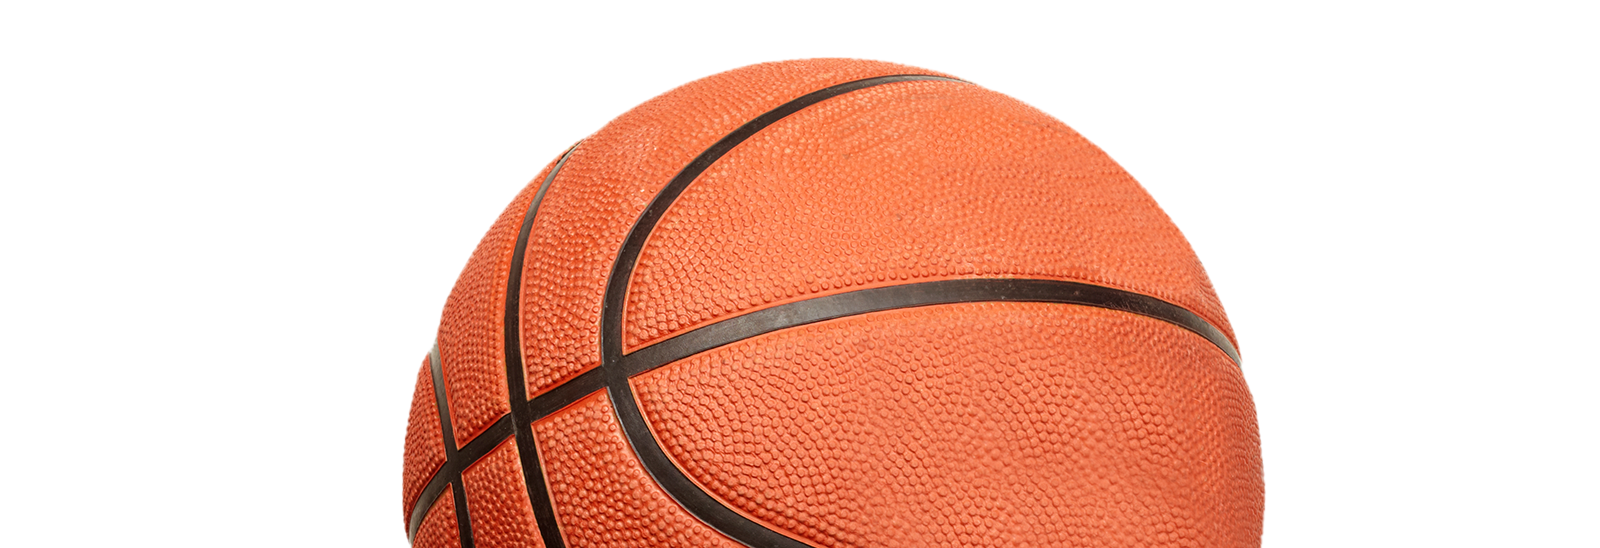 Picture of basketball 